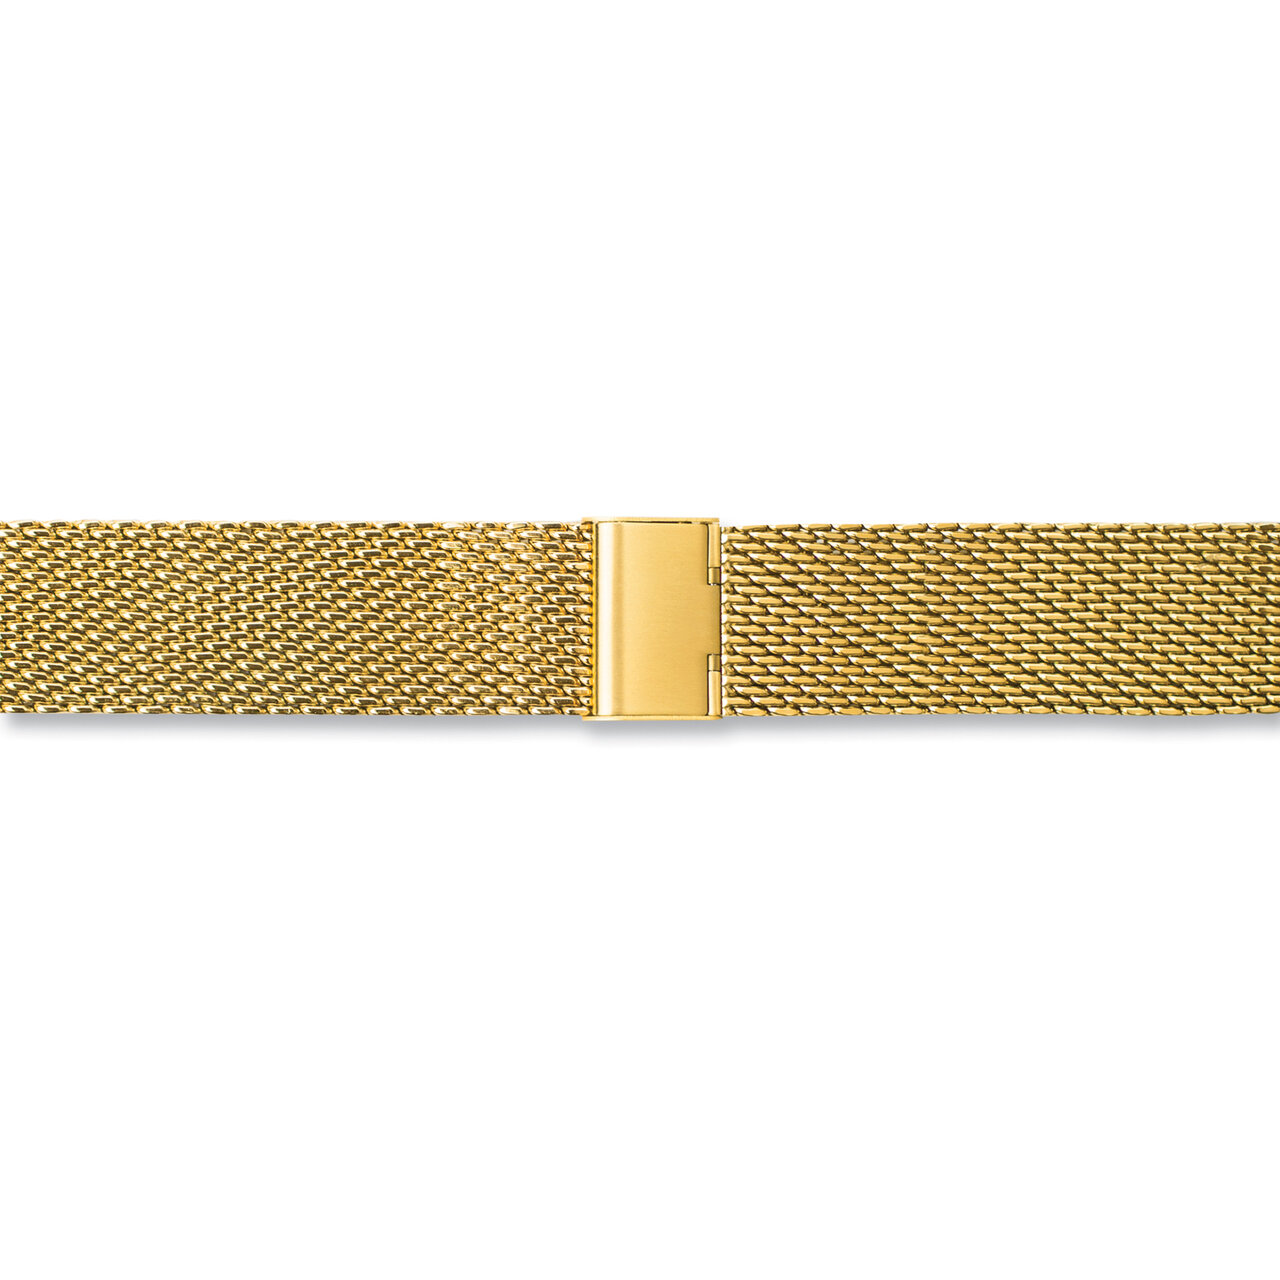 20mm Gold-tone Stainless Mesh with Deployment Clasp Watch Band BA417-20